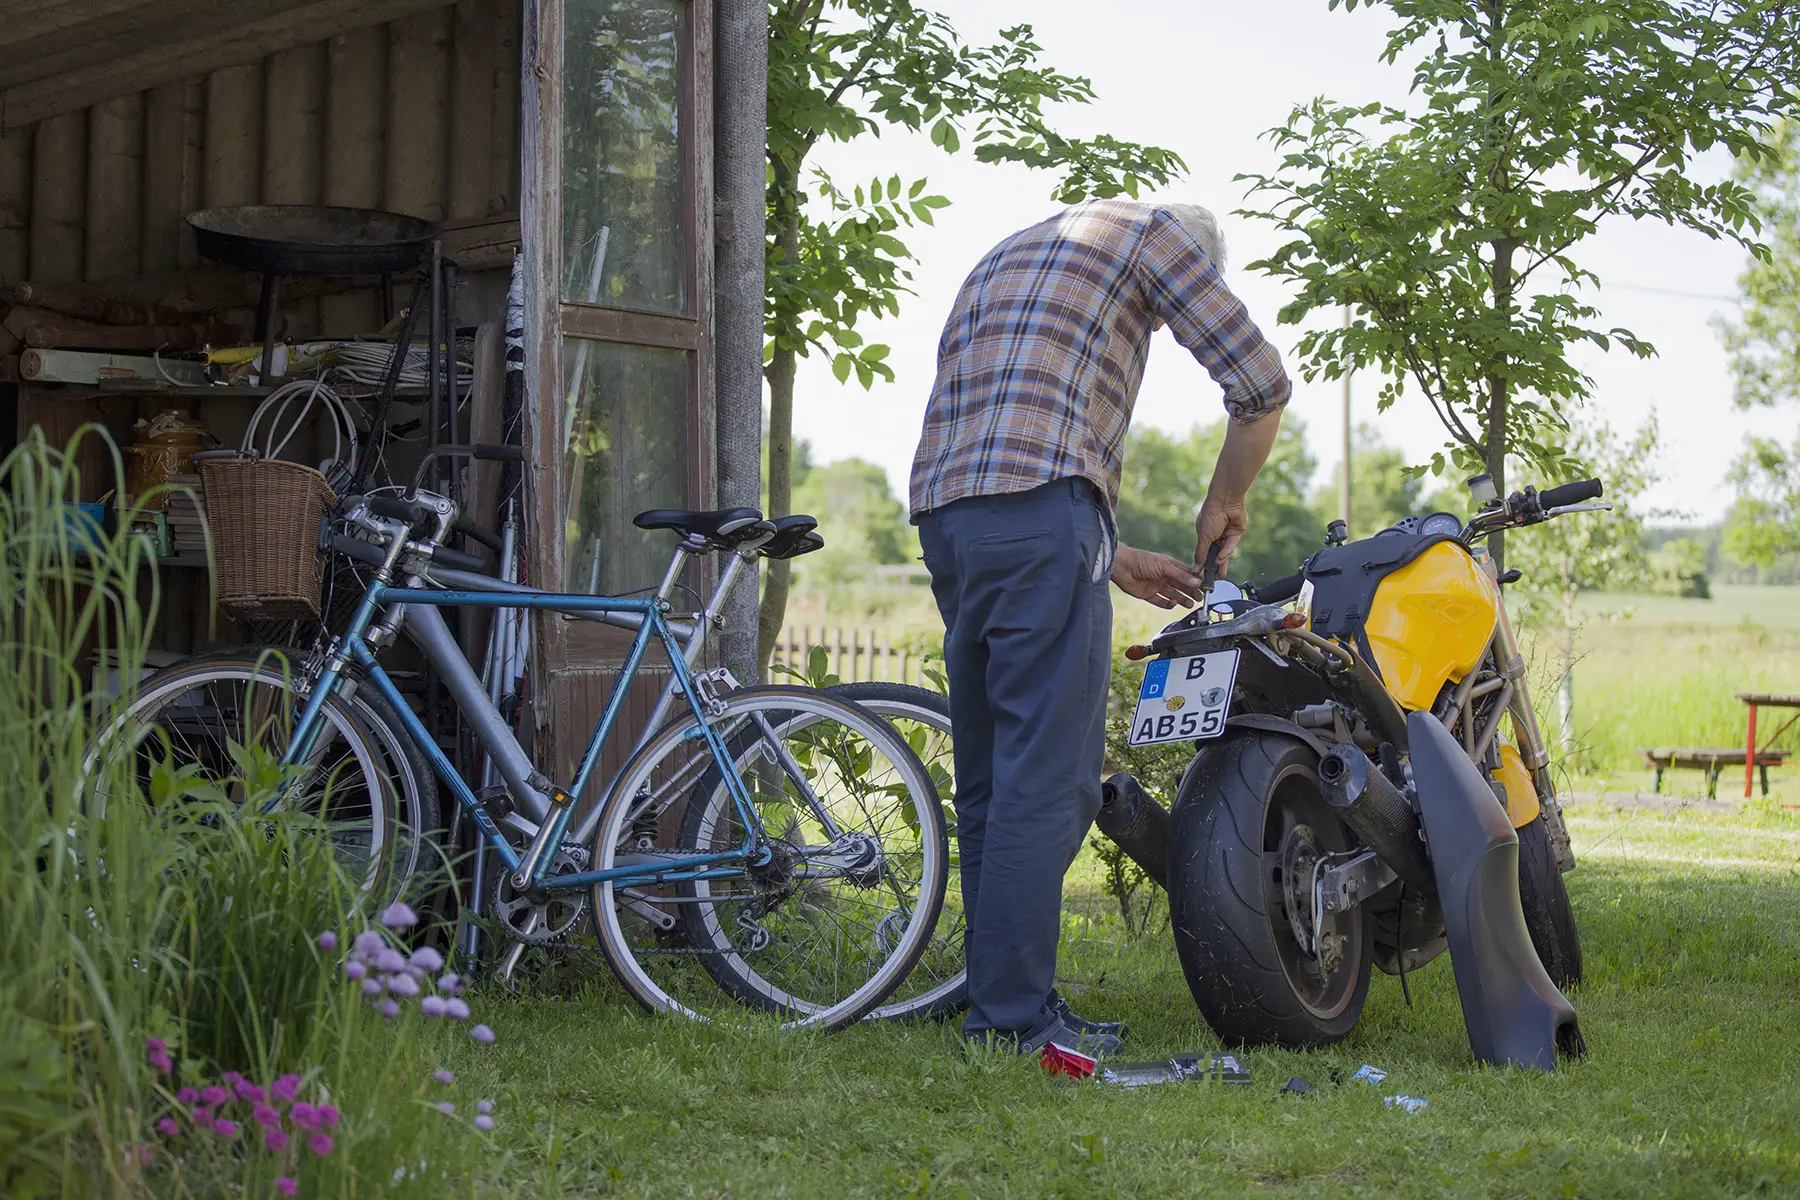 Rear view of an older man repairing motorcycle at yard, German license plate clearly visible